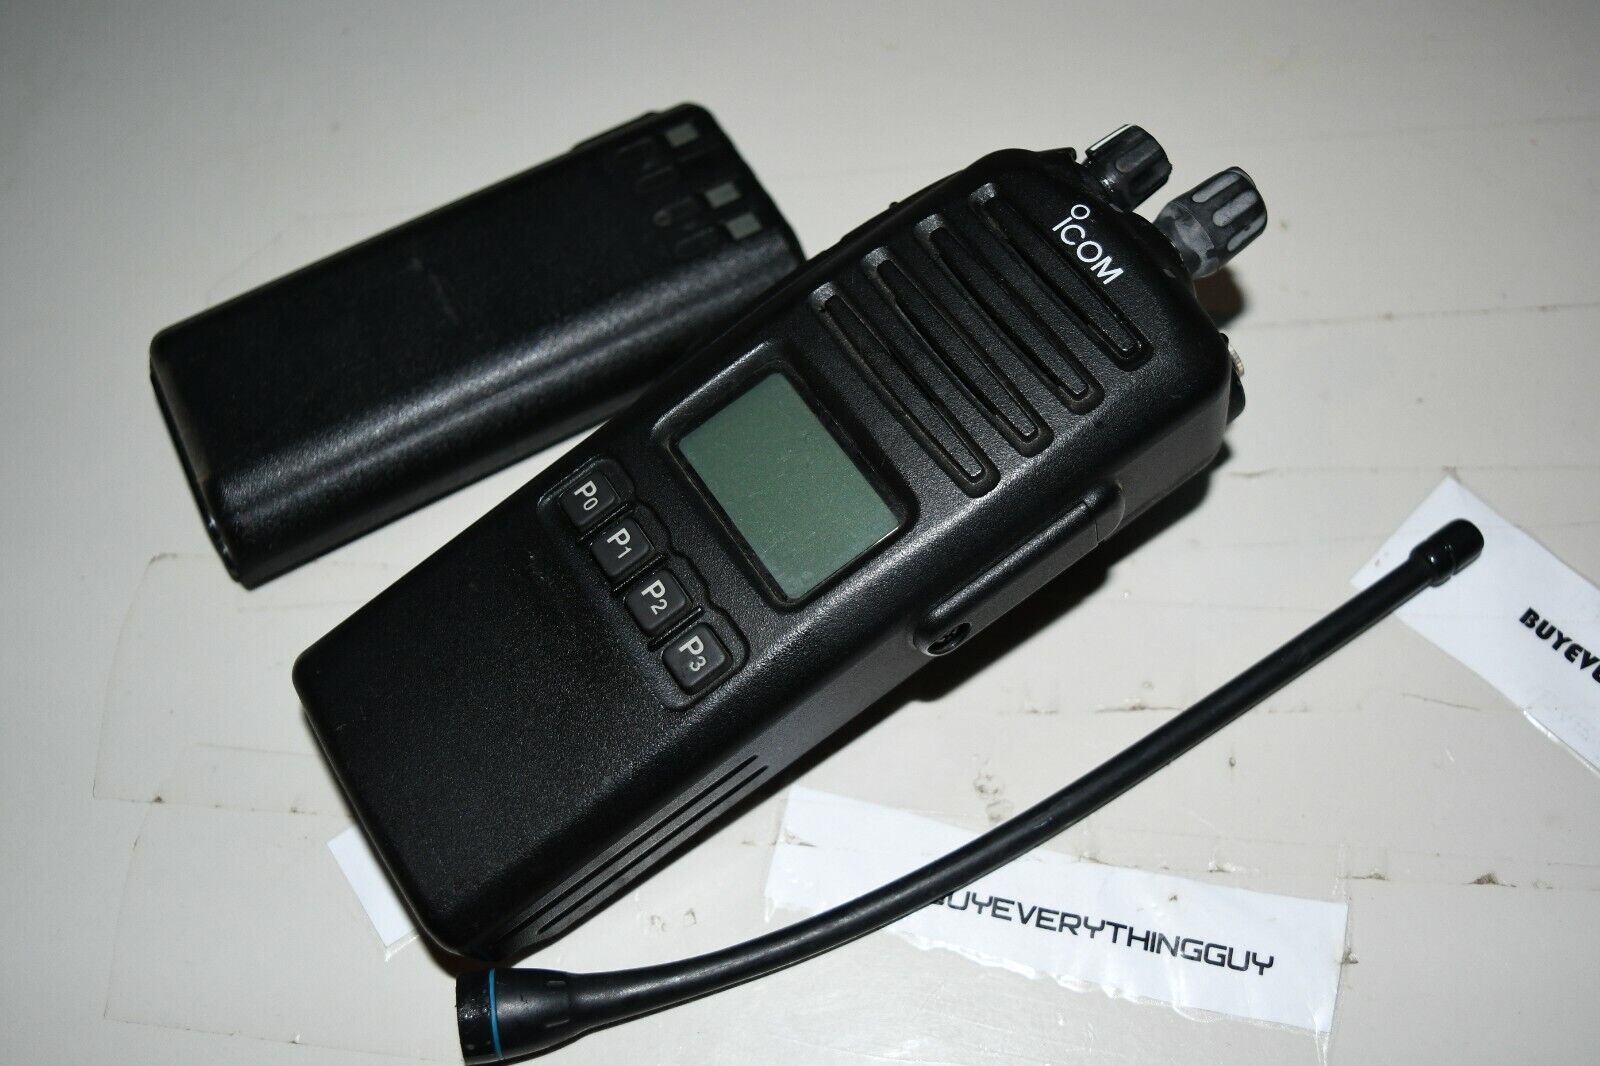 Icom Ic-f80ds P25 Radio No Charger Read First #2c